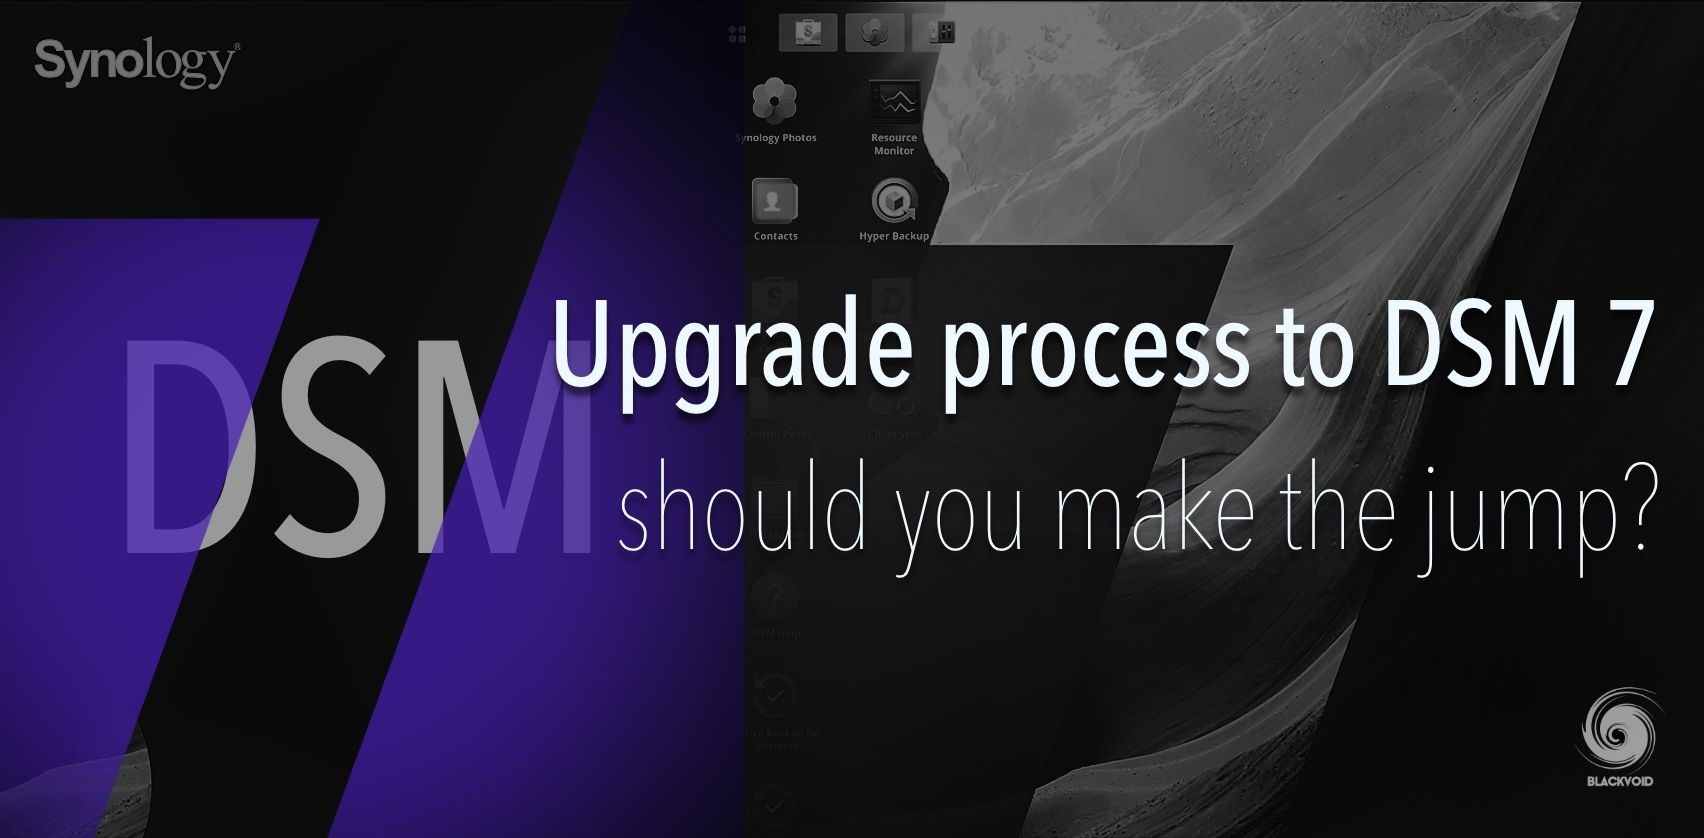 DSM 7 - Upgrade from DSM 6 to the new version